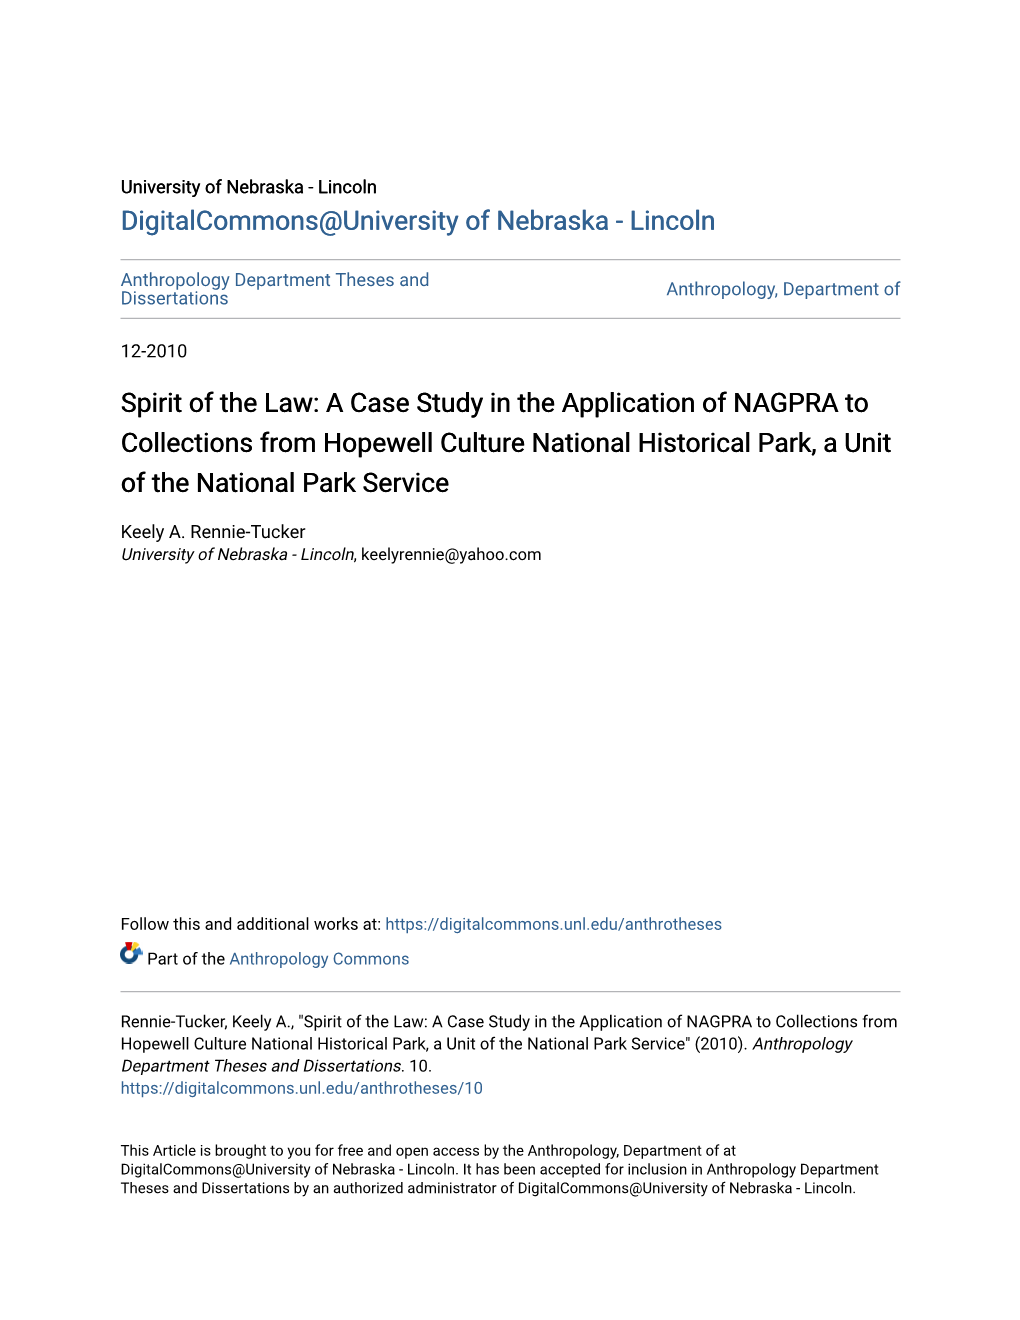 A Case Study in the Application of NAGPRA to Collections from Hopewell Culture National Historical Park, a Unit of the National Park Service